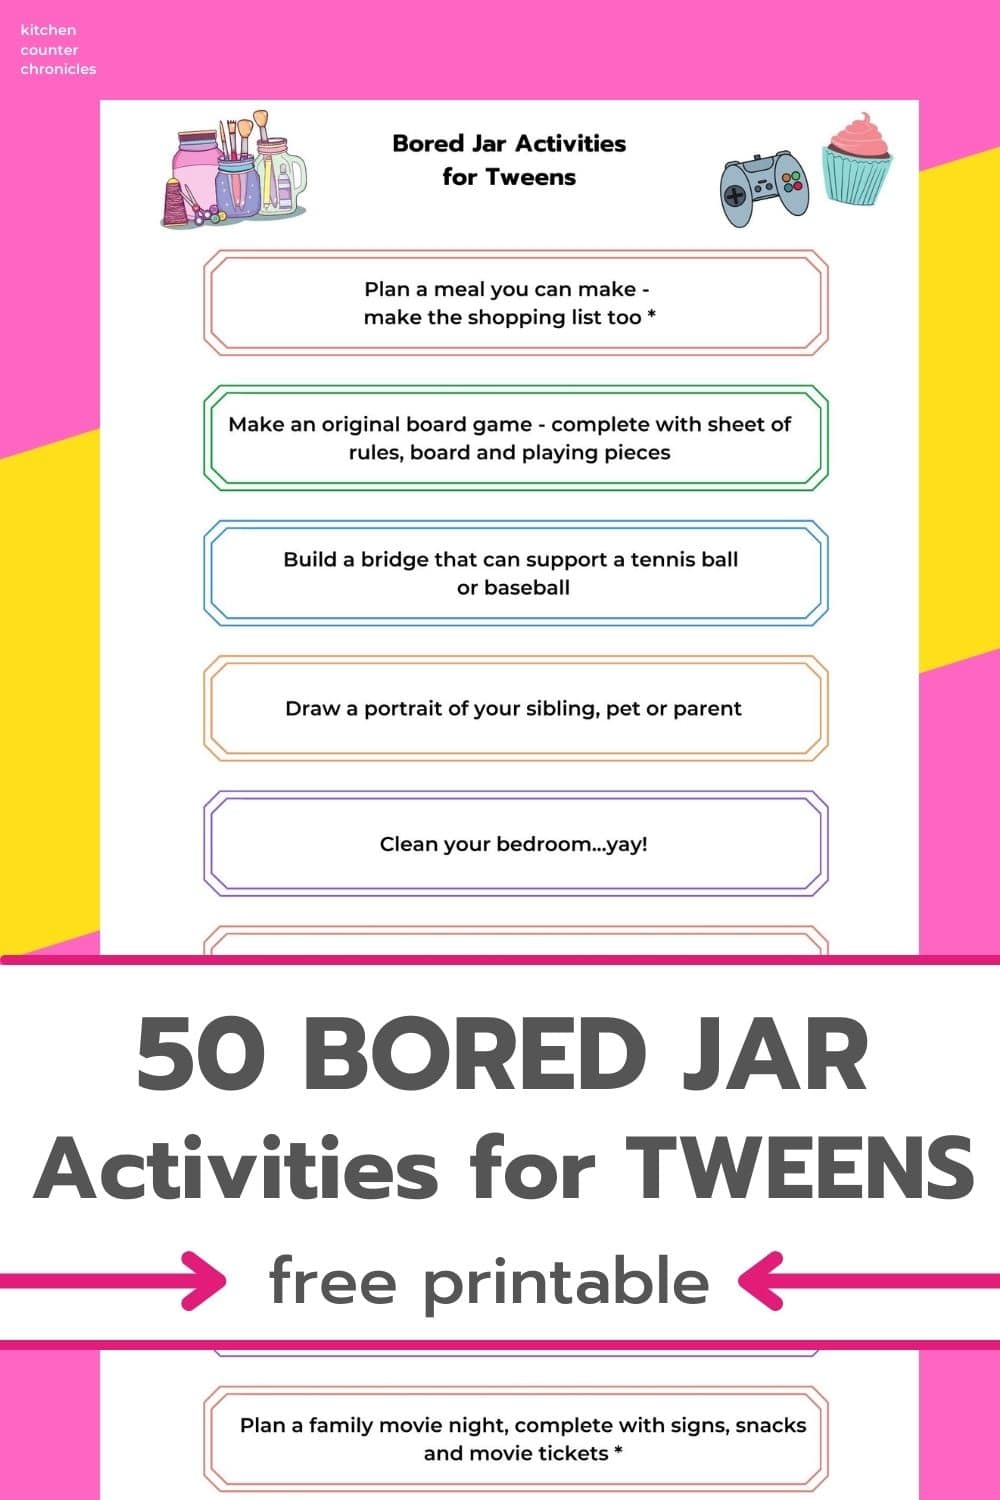 50 bored jar ideas for tweens printable and title